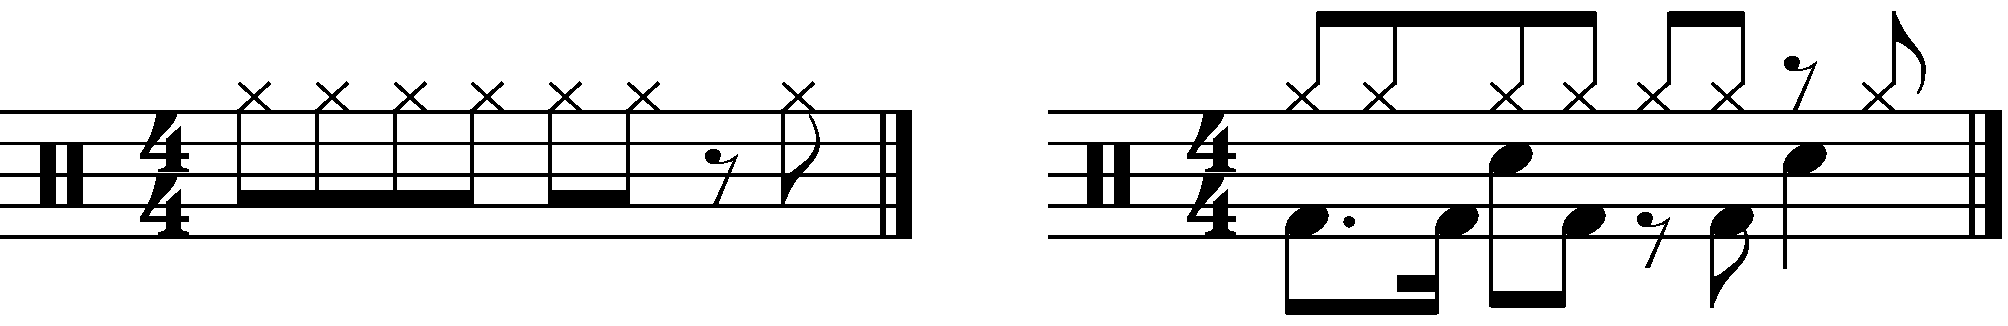 A groove with 8th note rests in the right hand